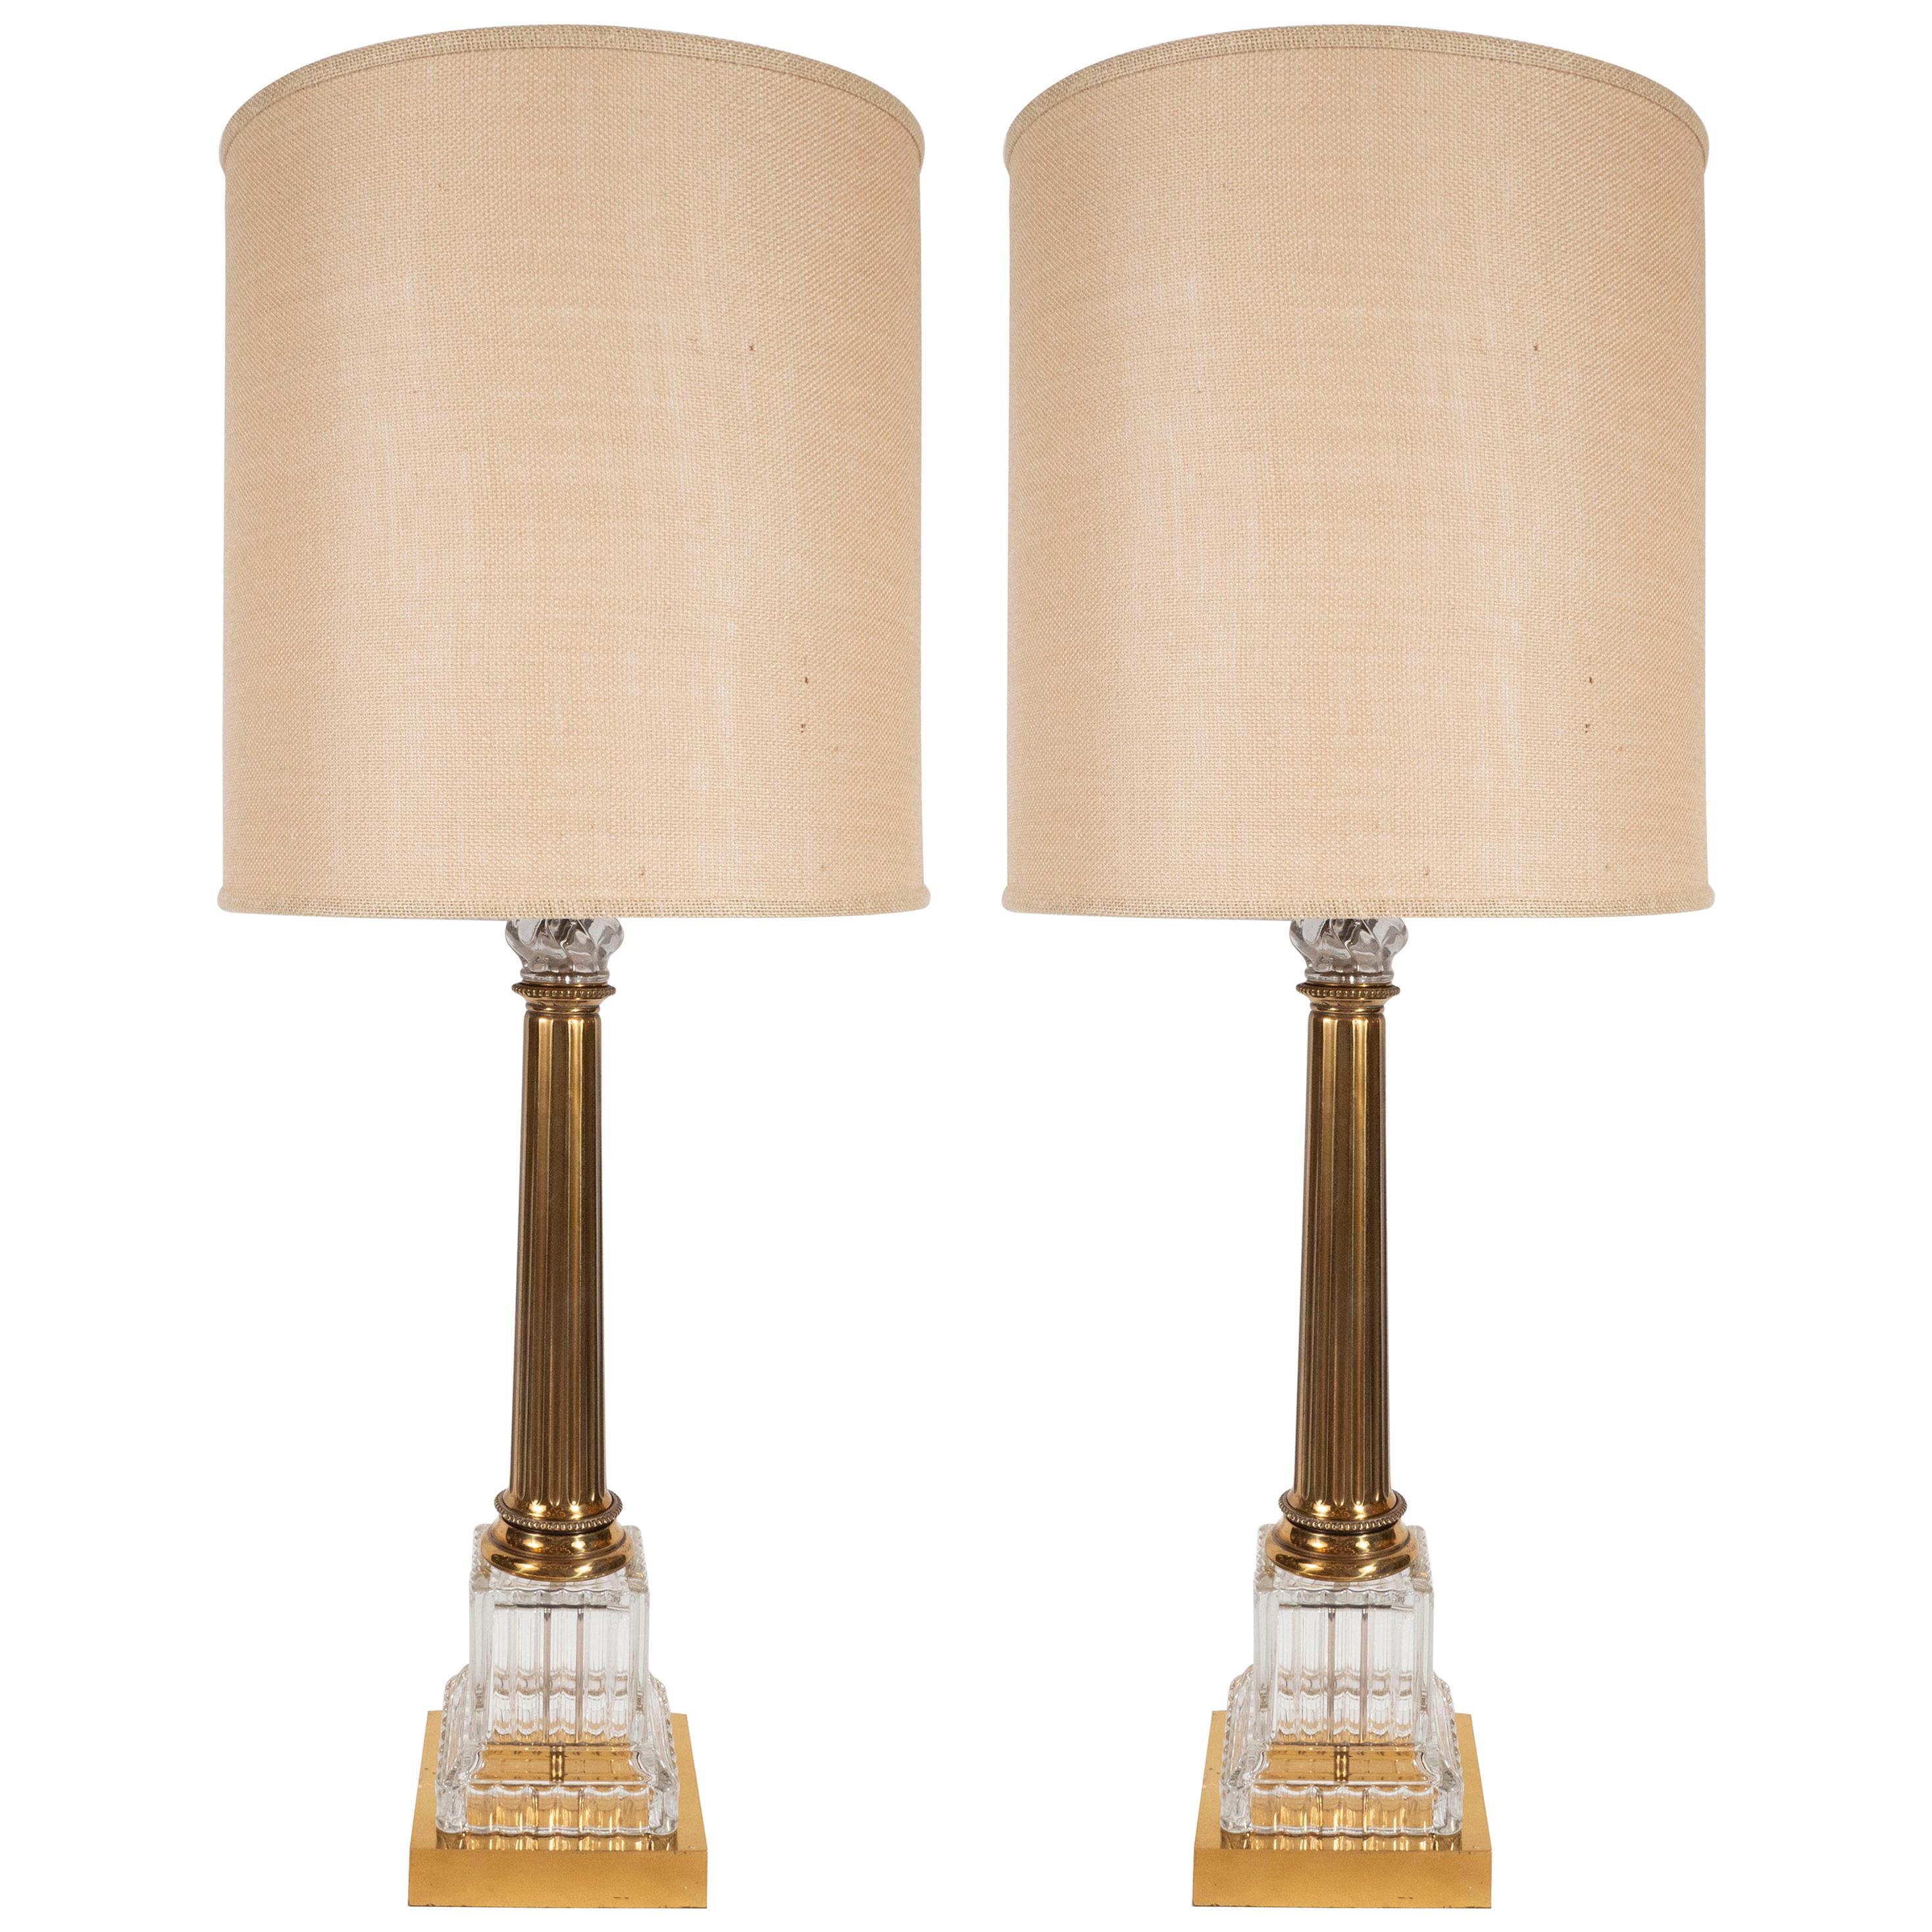 Pair of Midcentury 24-Karat Gold and Translucent Crystal Table Lamps by Baccarat